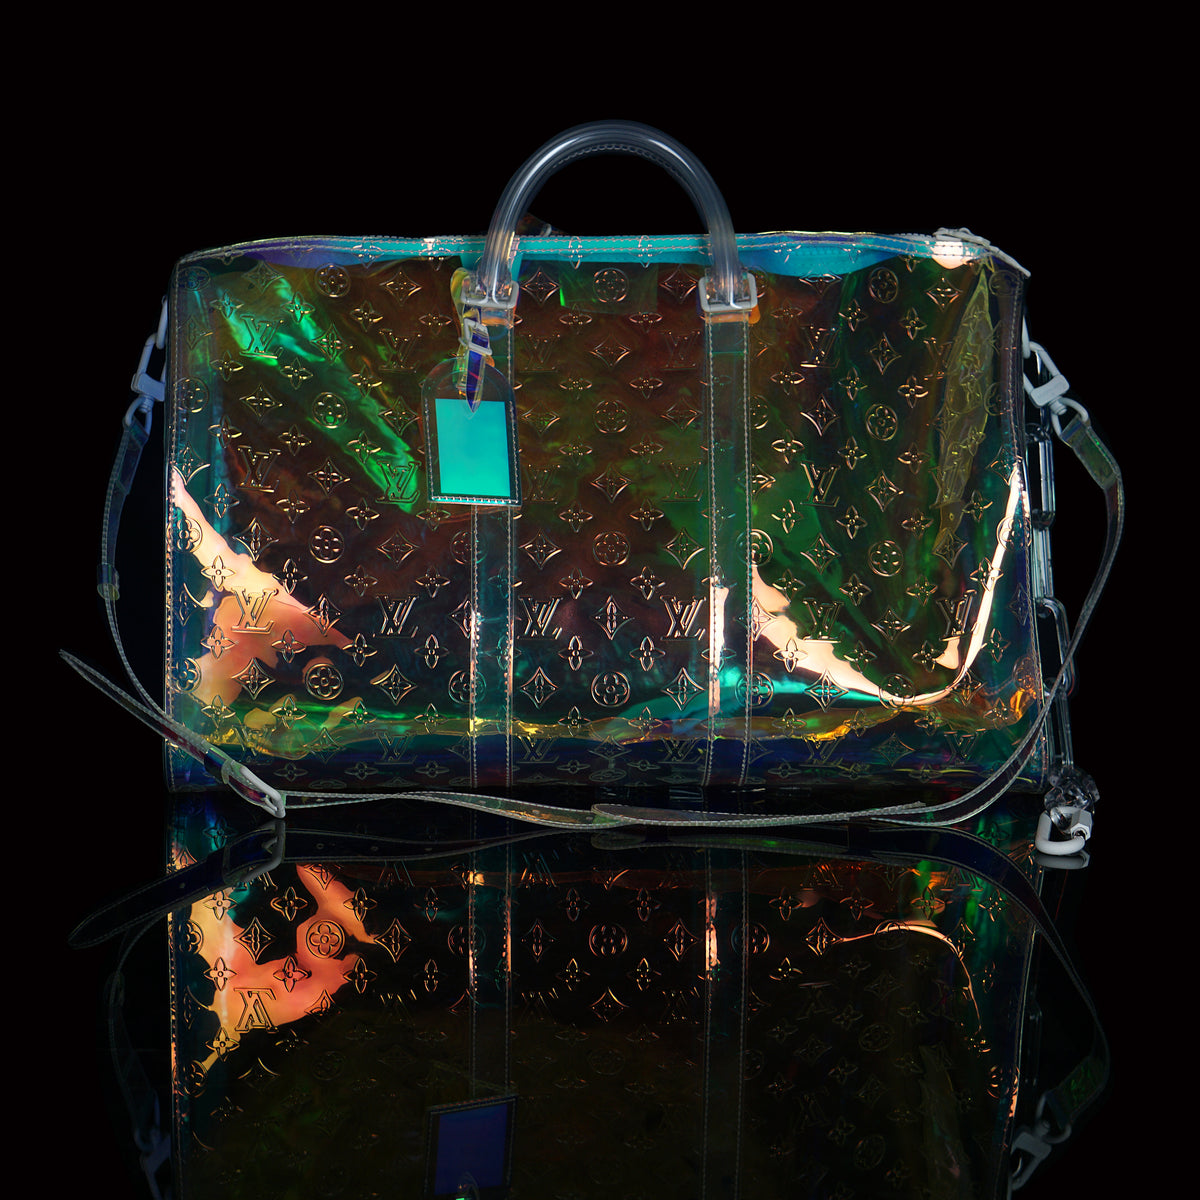 Louis Vuitton Prism Bandouliere Keepall 50 by Virgil Abloh - Iridescent bag  - BRAND NEW - Handbagholic